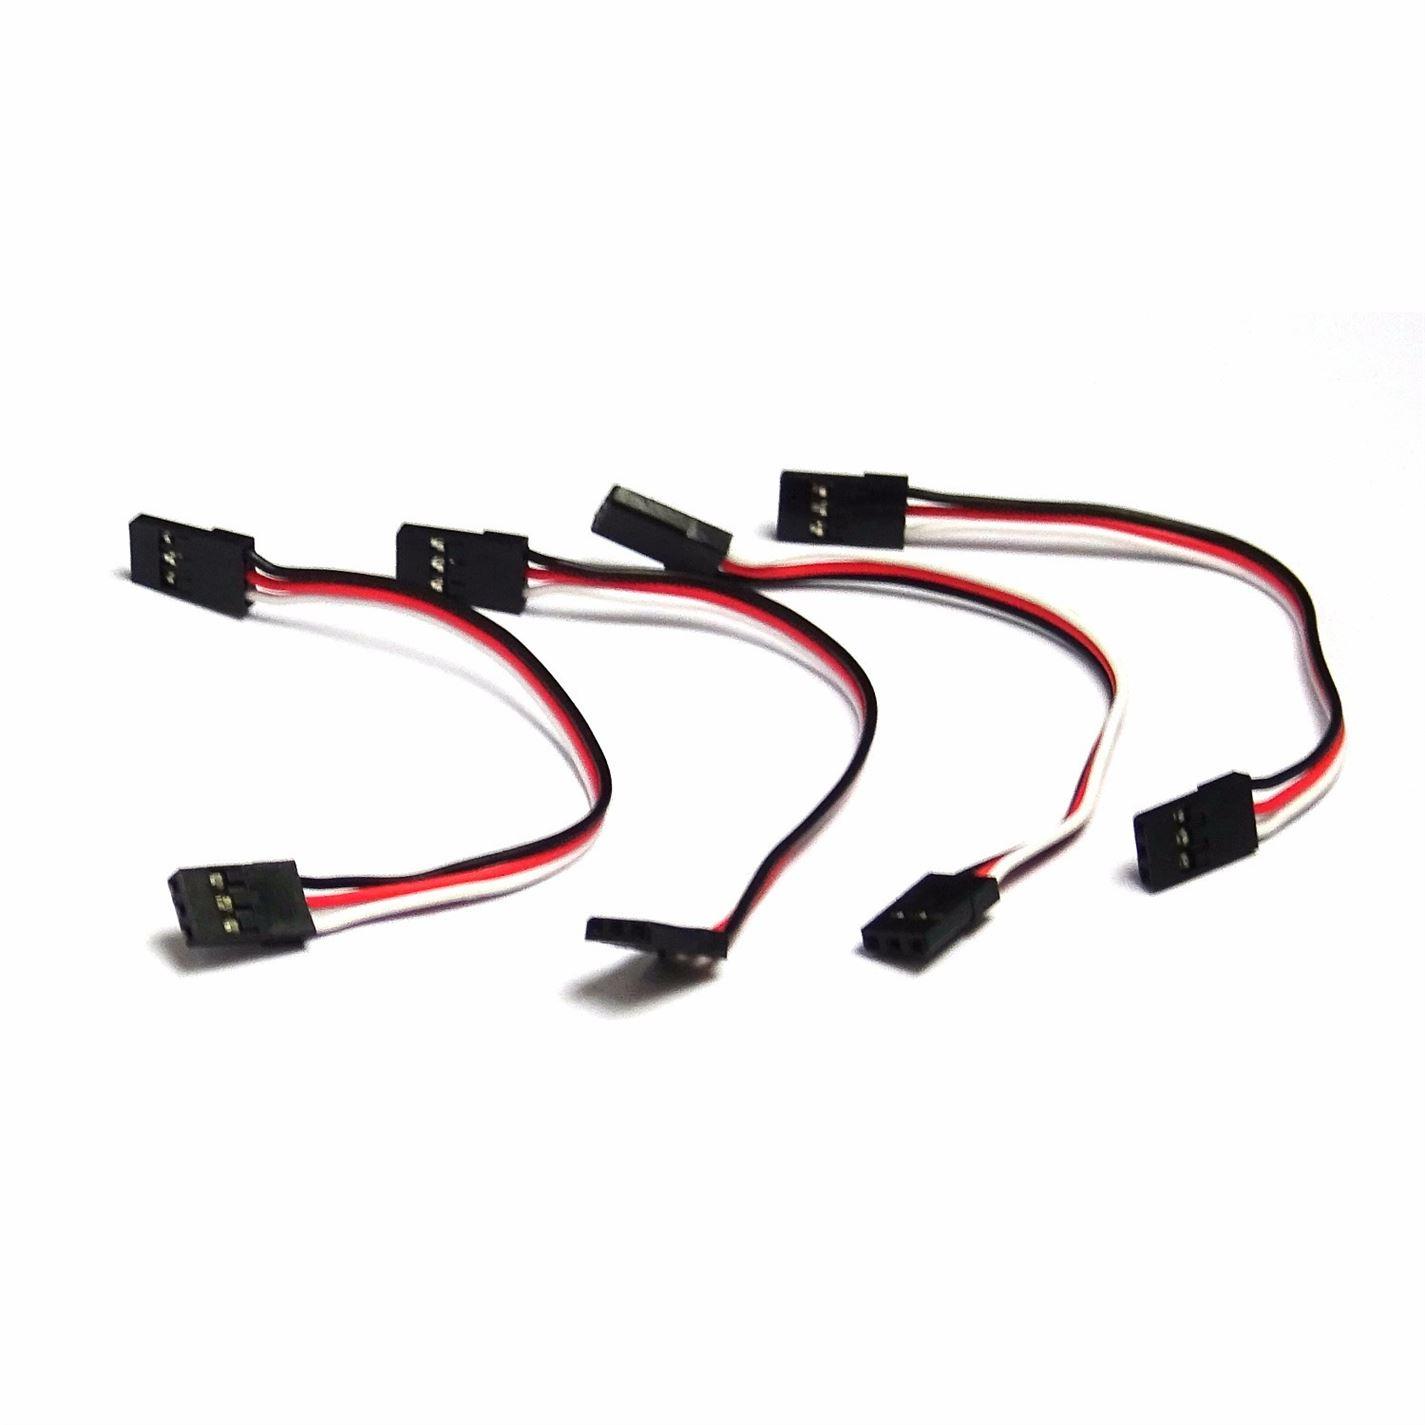 4x 100mm Servo Extension Lead Wire Cable MALE TO MALE KK MK MWC Flight Control - UK Seller